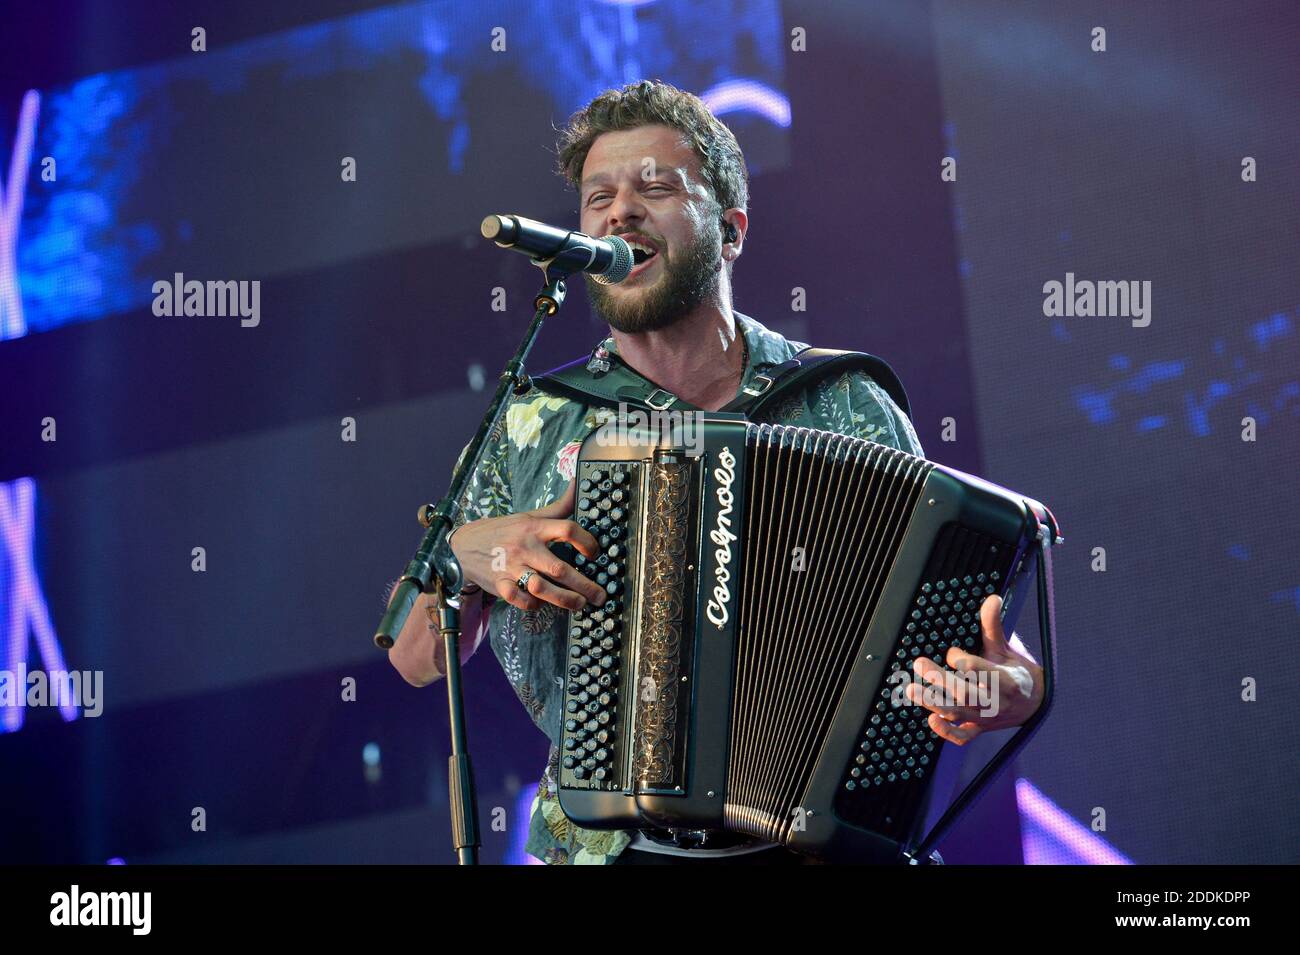 Claudio Capeo performing live on stage during Radio Scoop Music Tour 2019  in Feurs, France on July 13, 2019. Photo by Julien  Reynaud/APS-Medias/ABACAPRESS.COM Stock Photo - Alamy